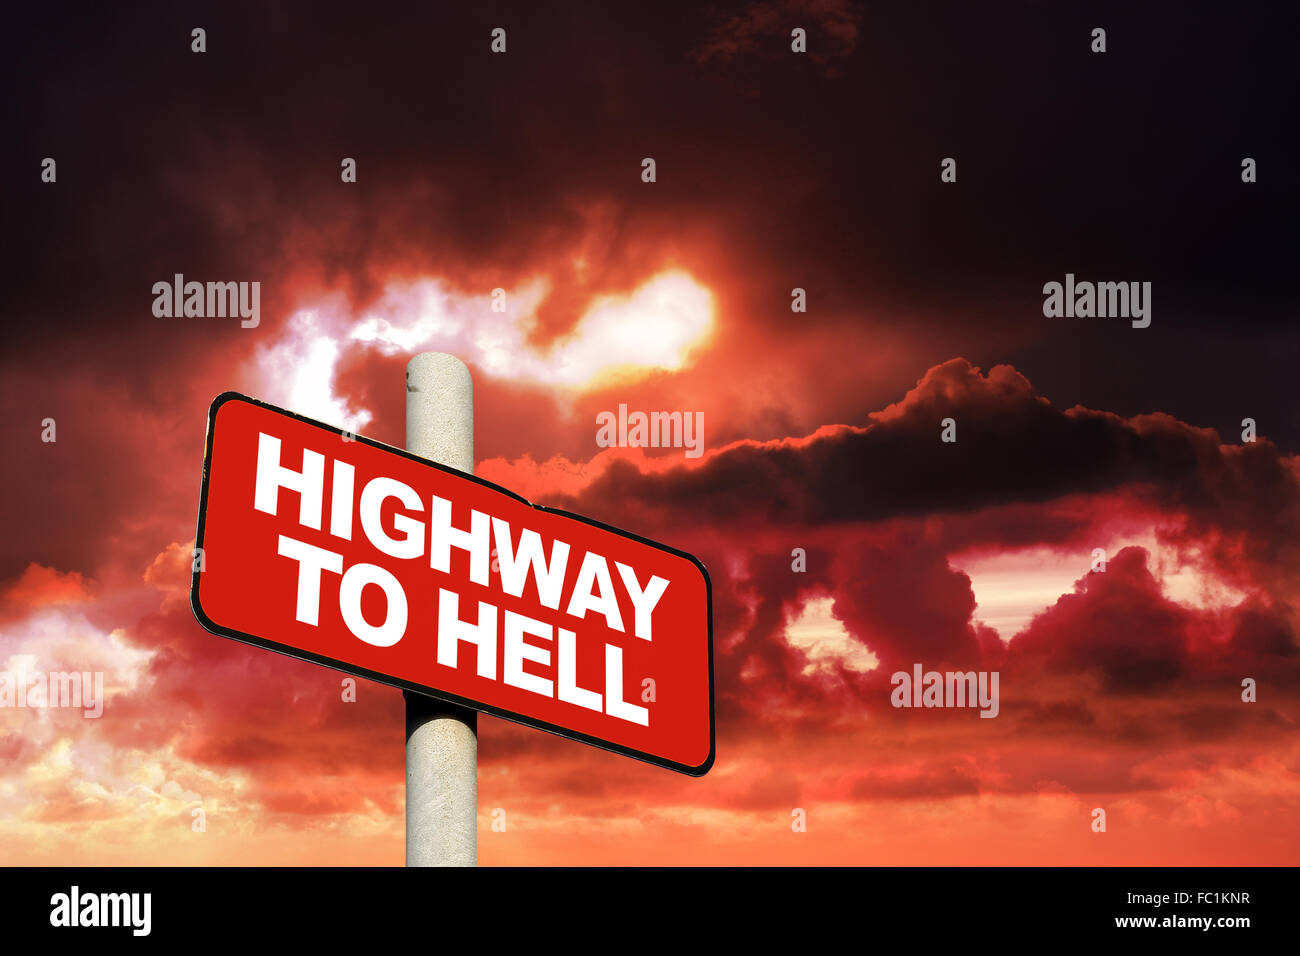 Highway to hell sign Stock Photo